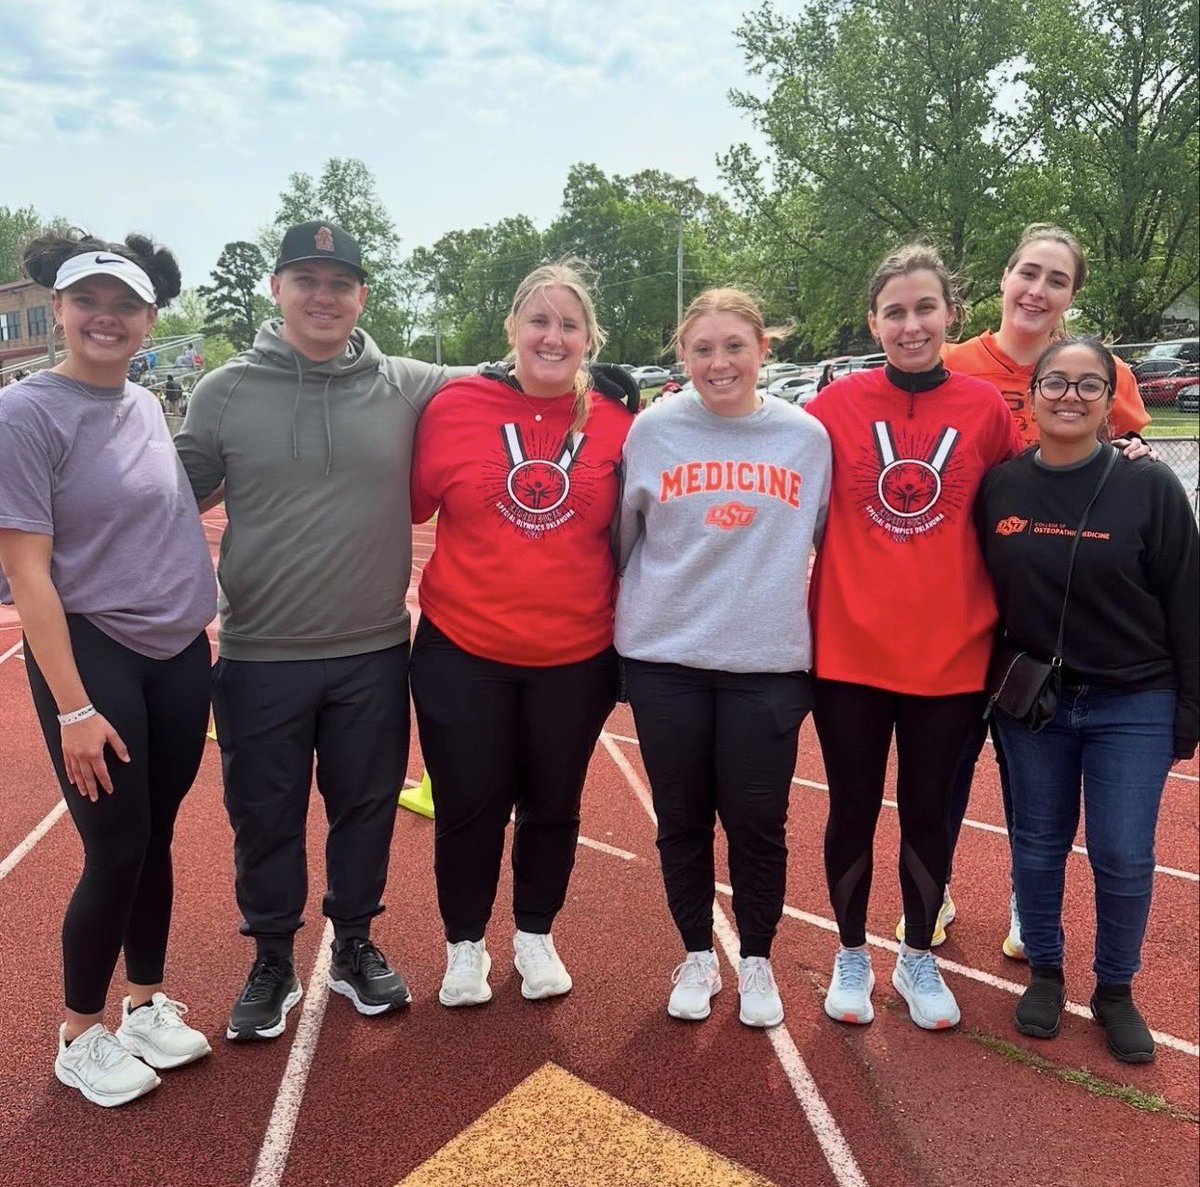 Recently, several of our students spent their weekend supporting athletes for @SpecialOlympics Oklahoma. Their volunteering spirit makes us beam with Orange pride!